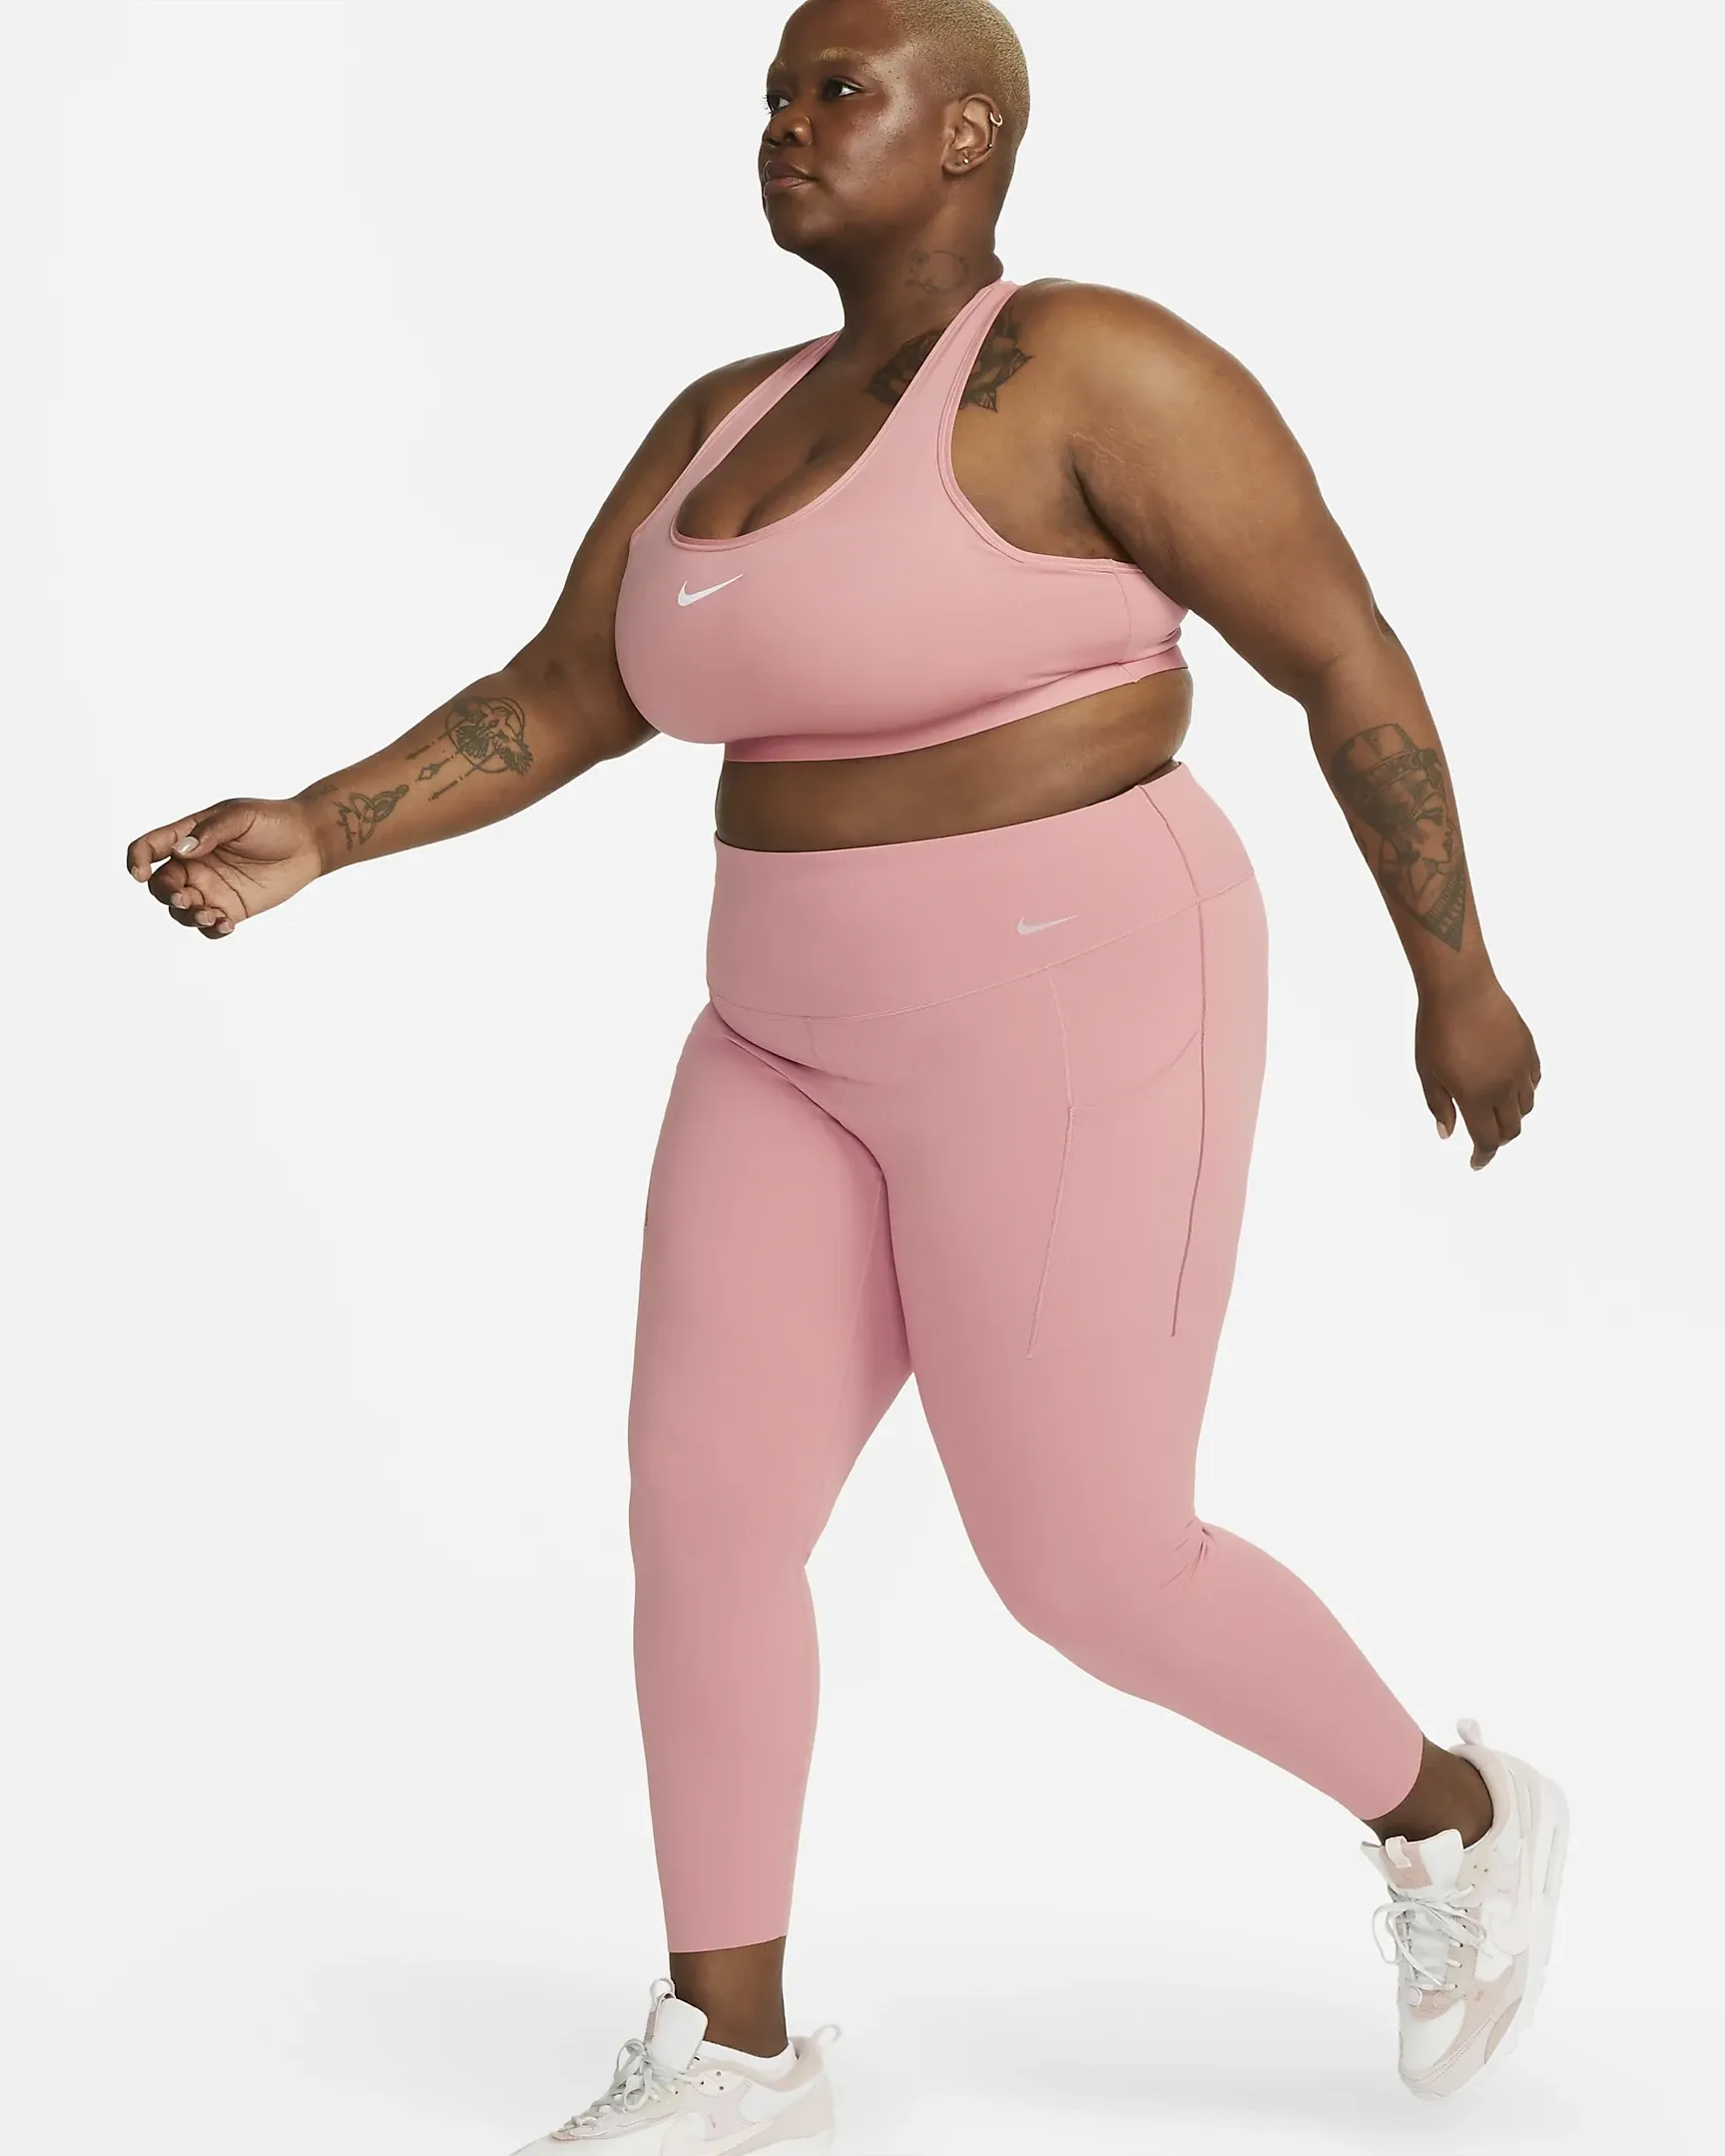 This Plus-Size Yogi Will Give You Serious Fitspiration - Brit + Co